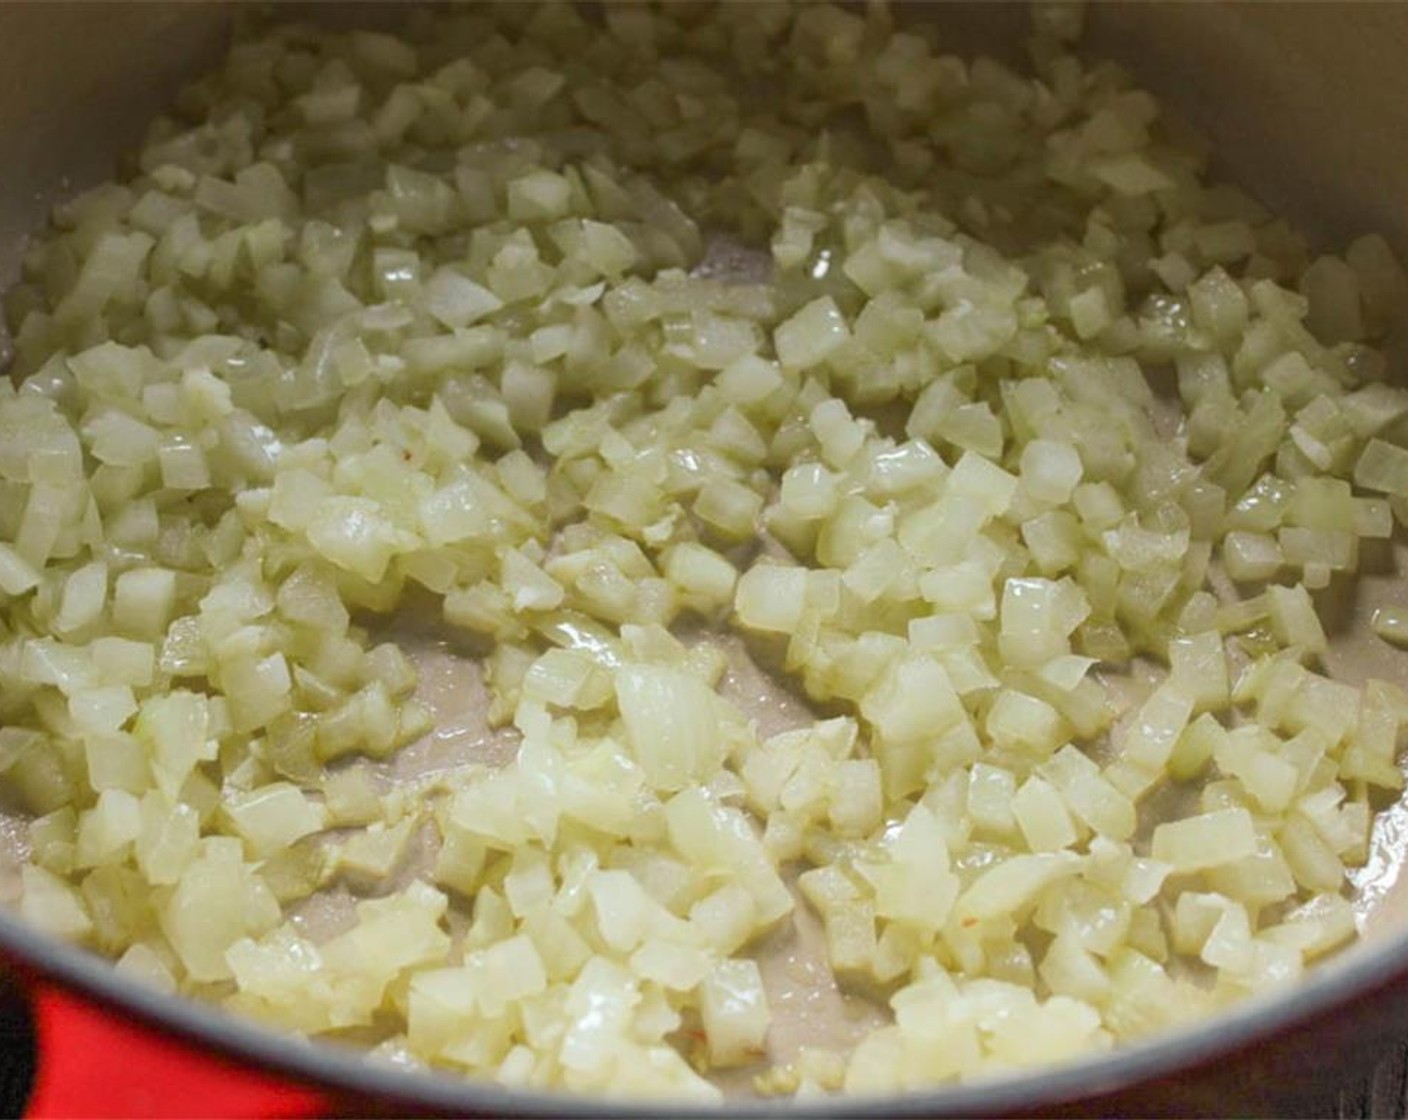 step 4 In a Dutch oven or large saucepan, heat 1 tablespoon of Olive Oil (1 Tbsp). When hot, add the onions and garlic and sauté for 3 minutes until the onions become translucent and the garlic is fragrant.